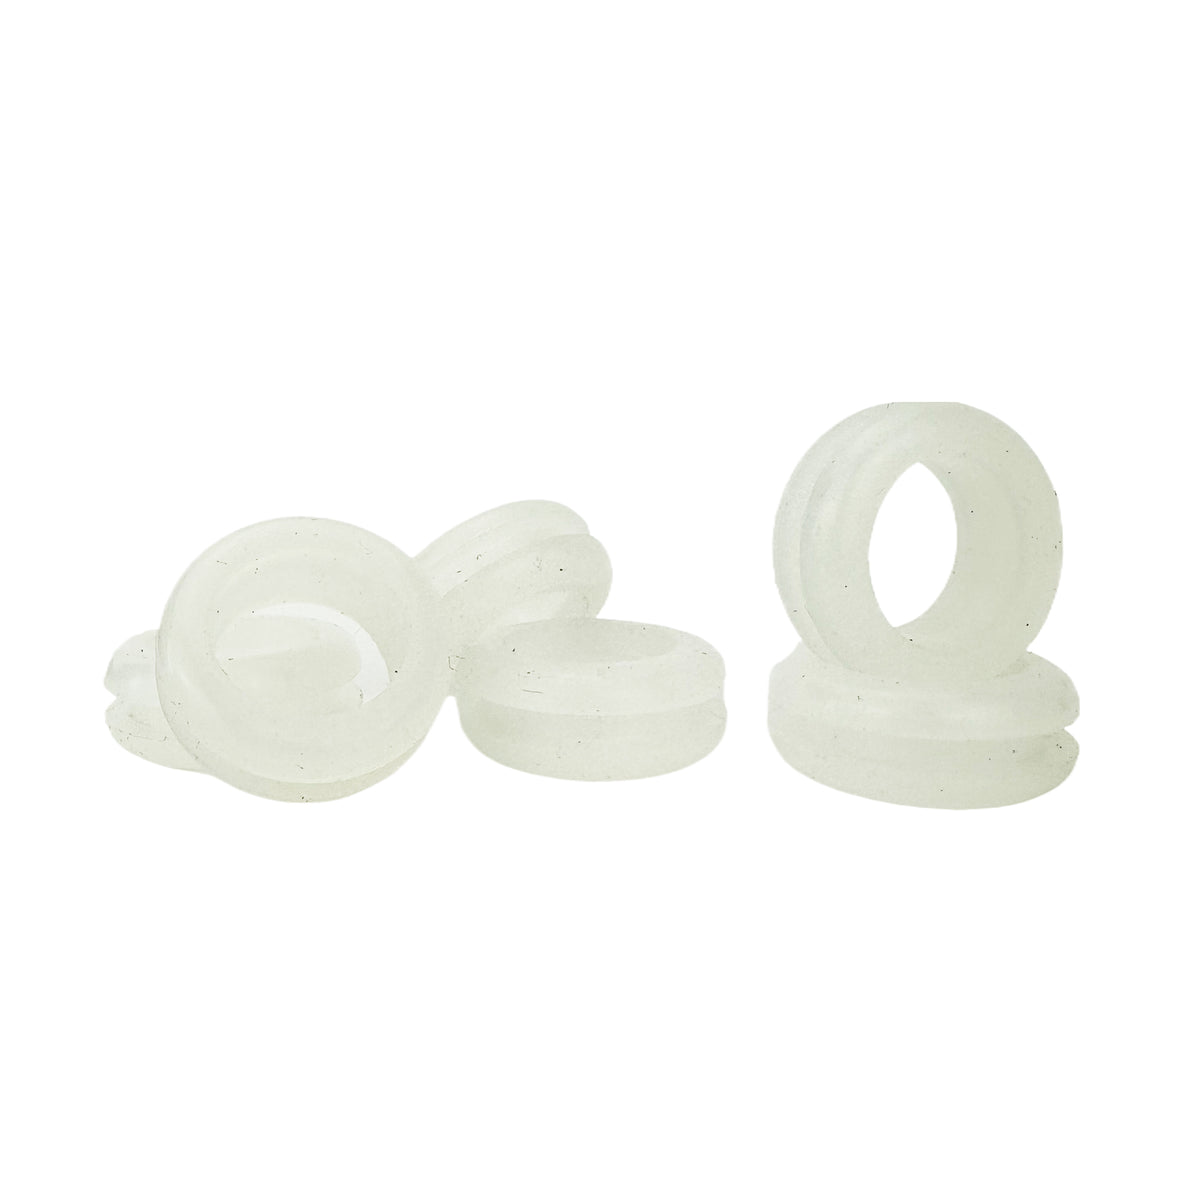 Silicone Rubber Grommets - 6 Pack